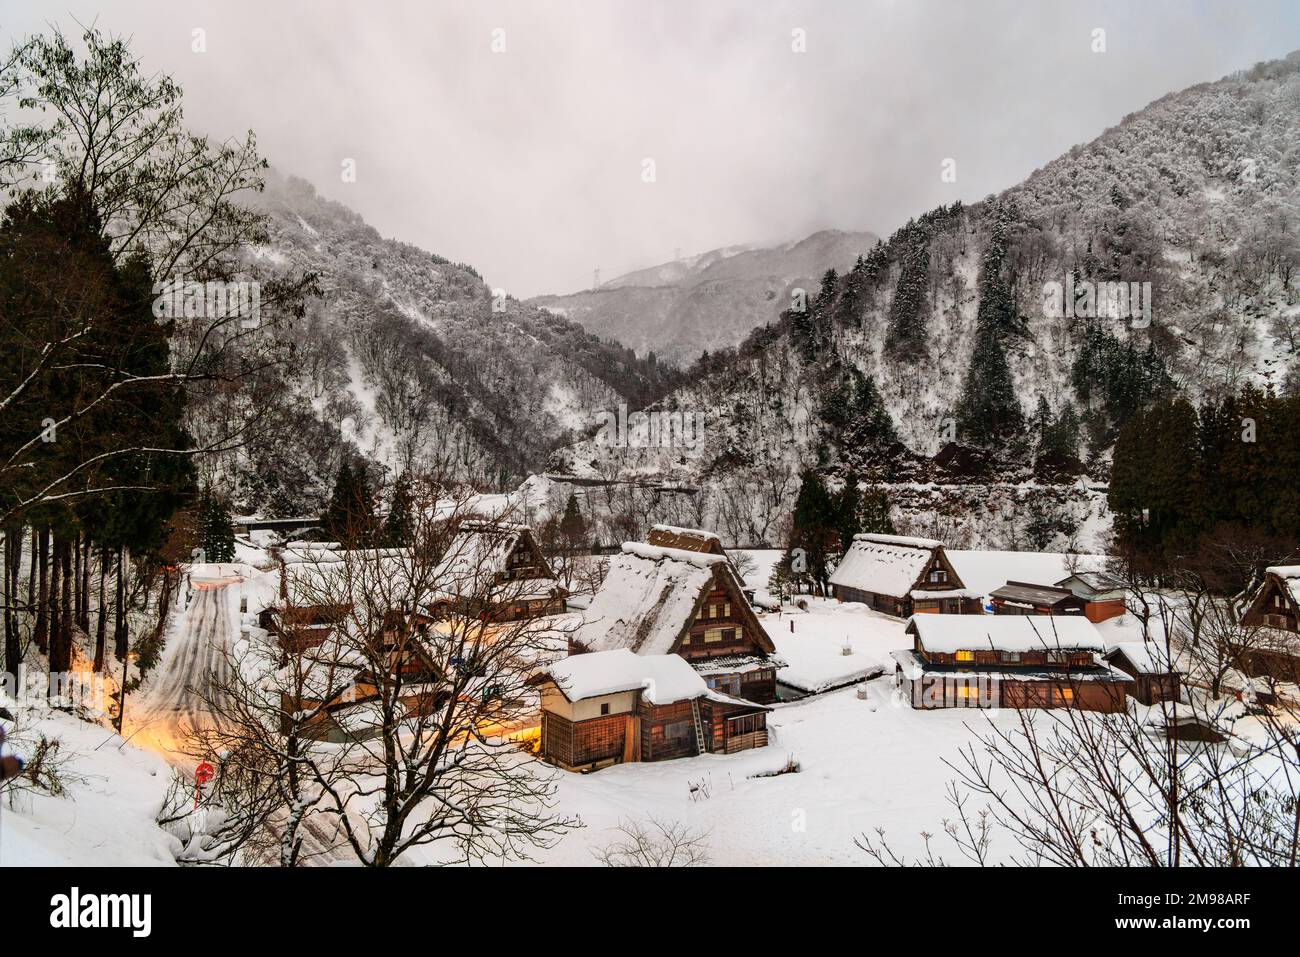 Lights on in snowy UNESCO World Heritage village in mountain landscape at dawn Stock Photo